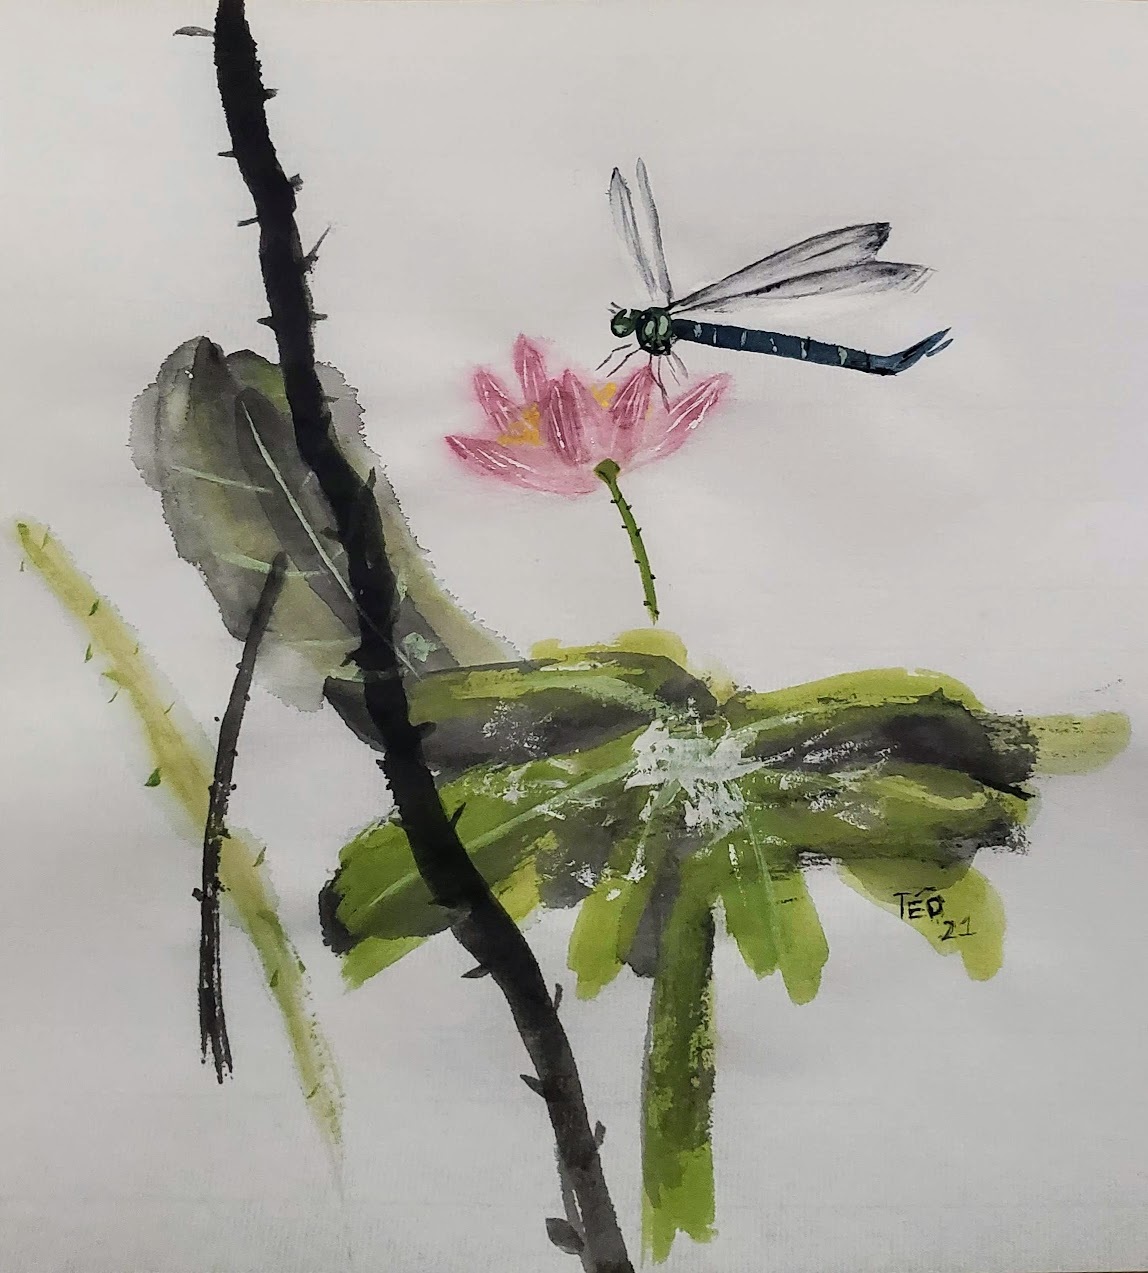 Watercolour painting of a dragonfly